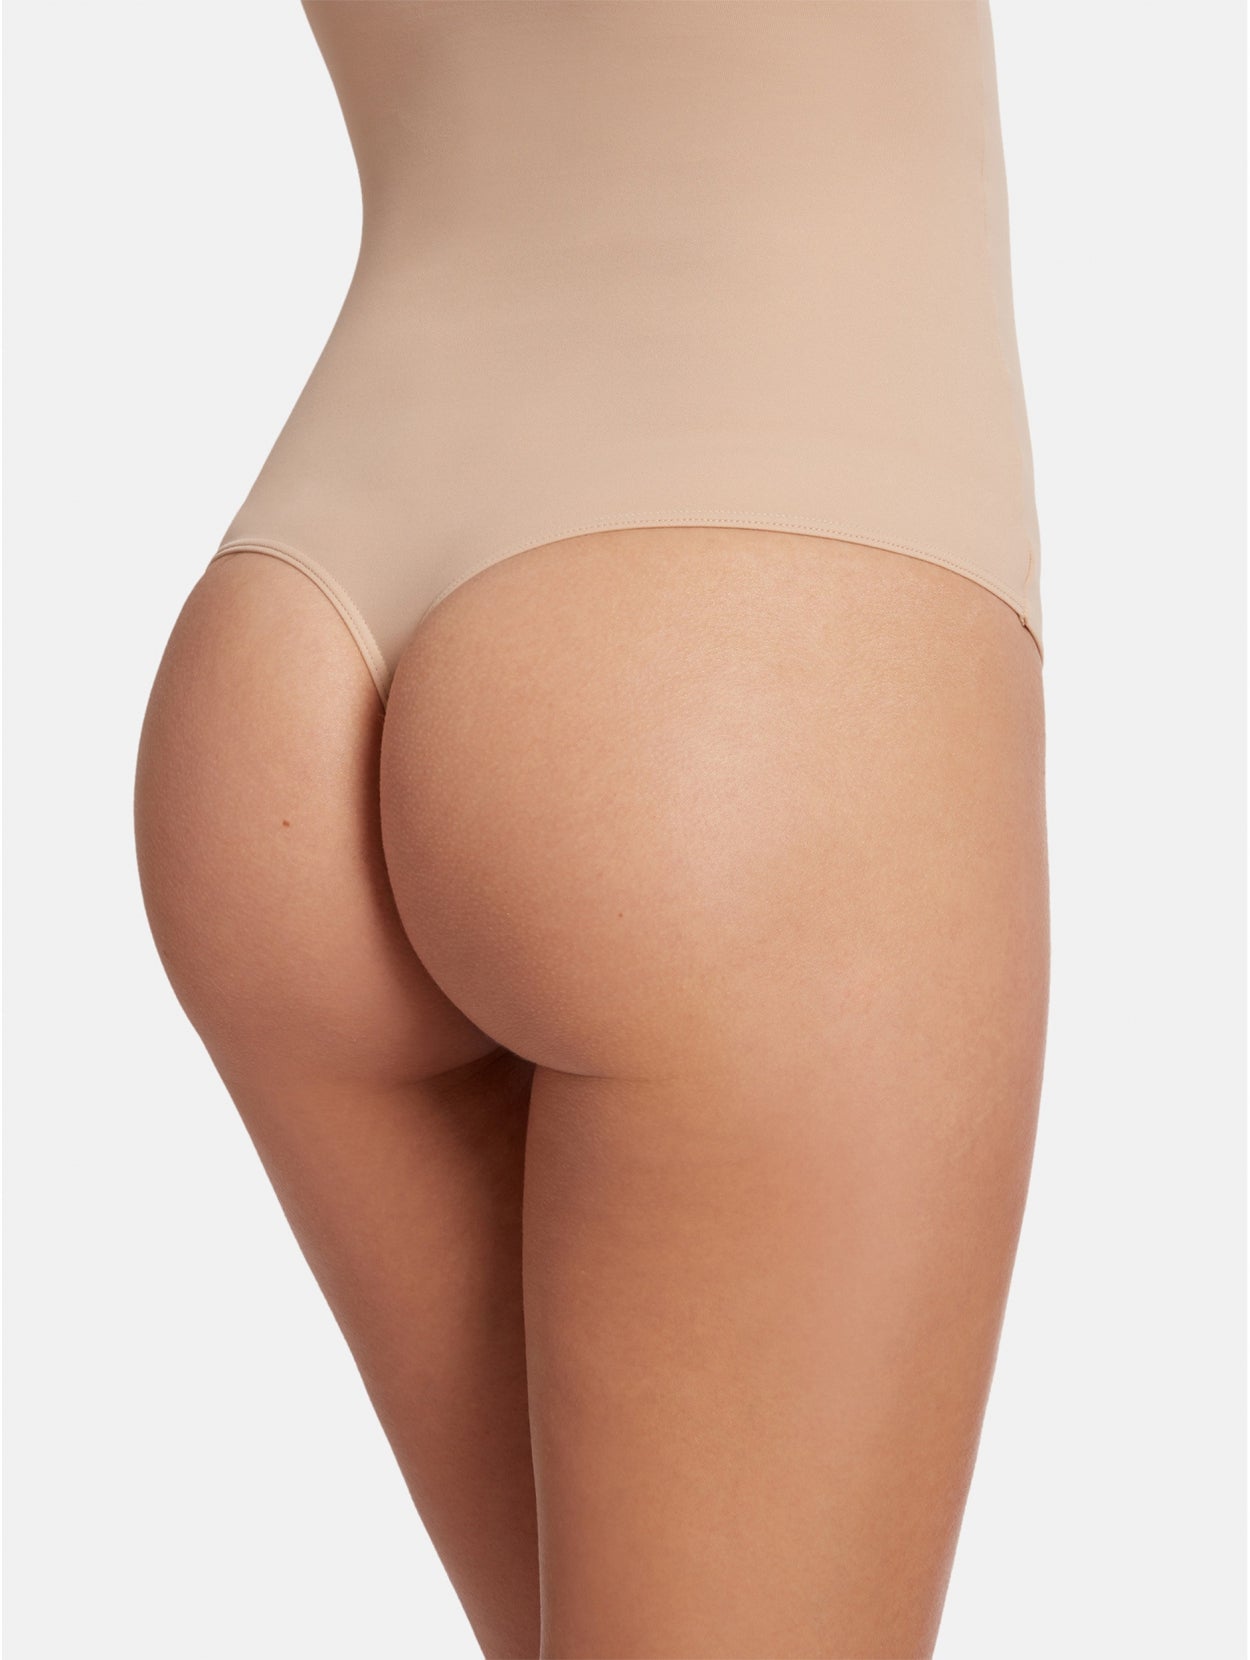 Wolford, Mat de Luxe Forming String Body